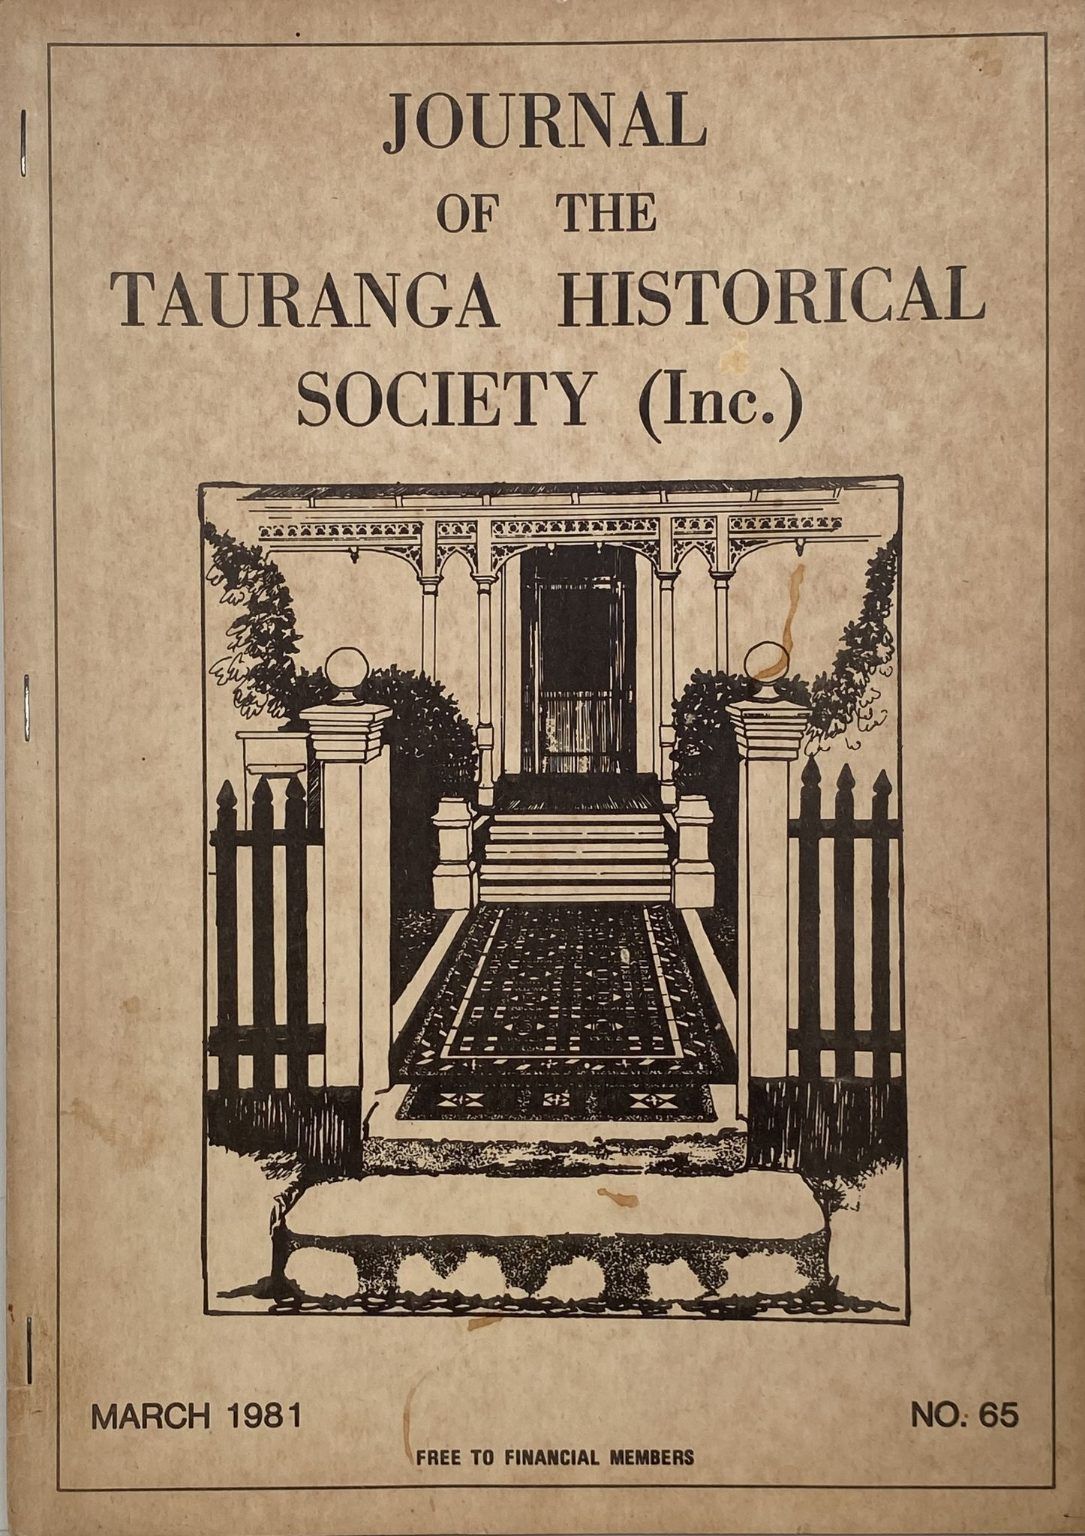 JOURNAL OF THE TAURANGA HISTORICAL SOCIETY (Inc) - No. 65, March 1981